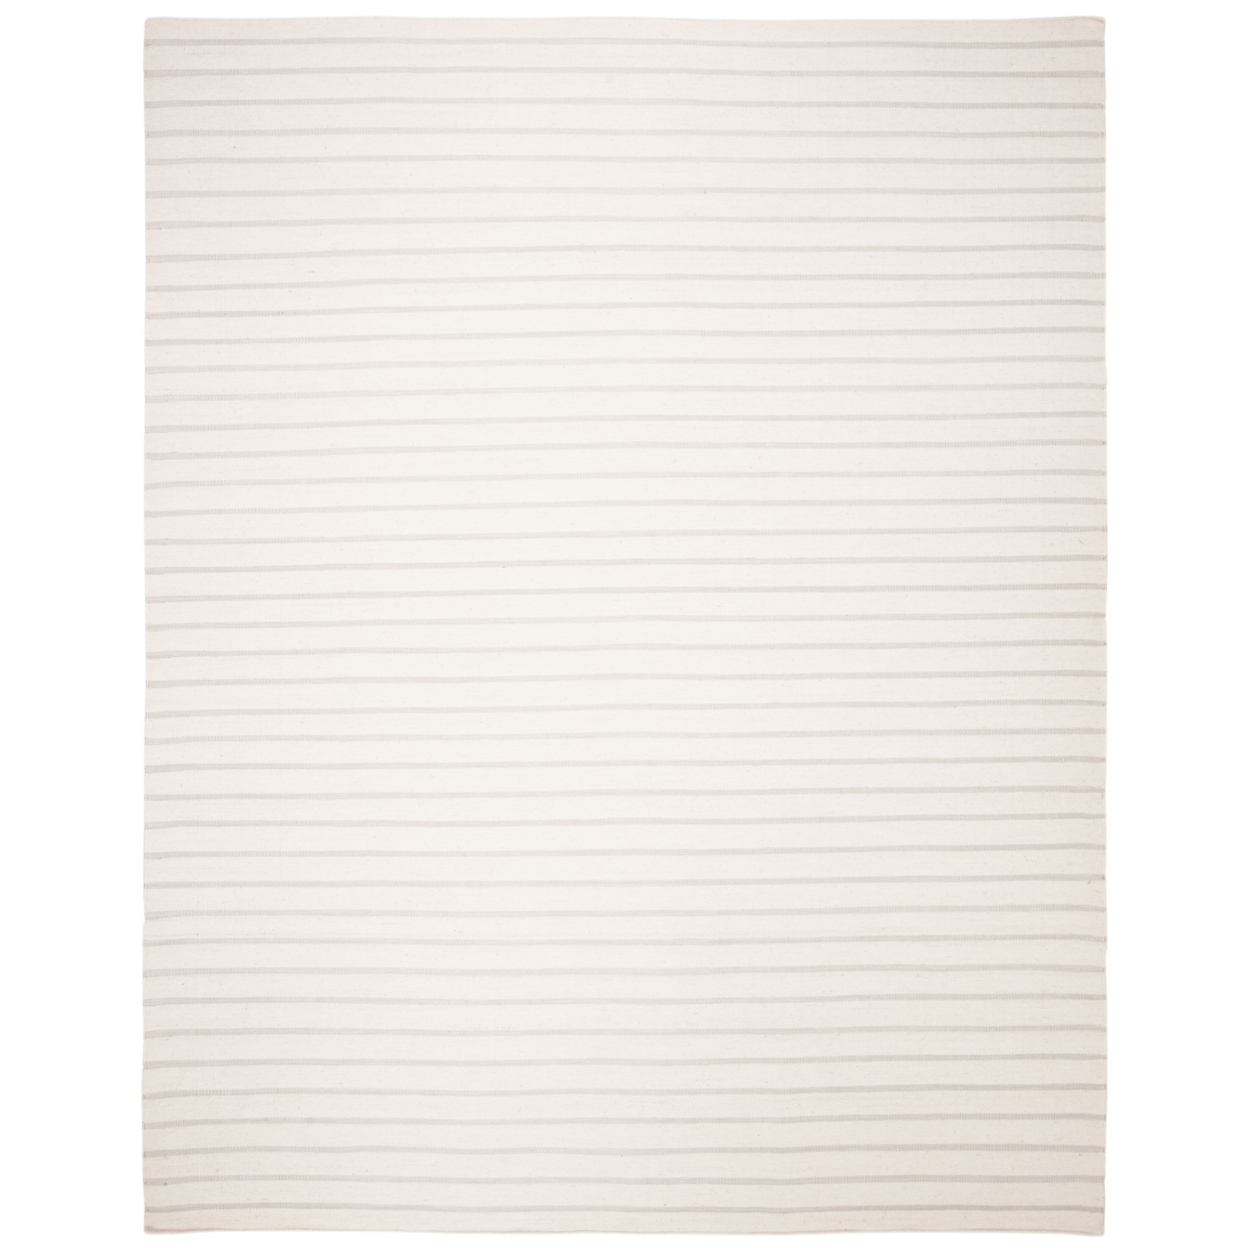 SAFAVIEH Dhurries Collection DHU313D Handwoven White Rug - 6' X 9'